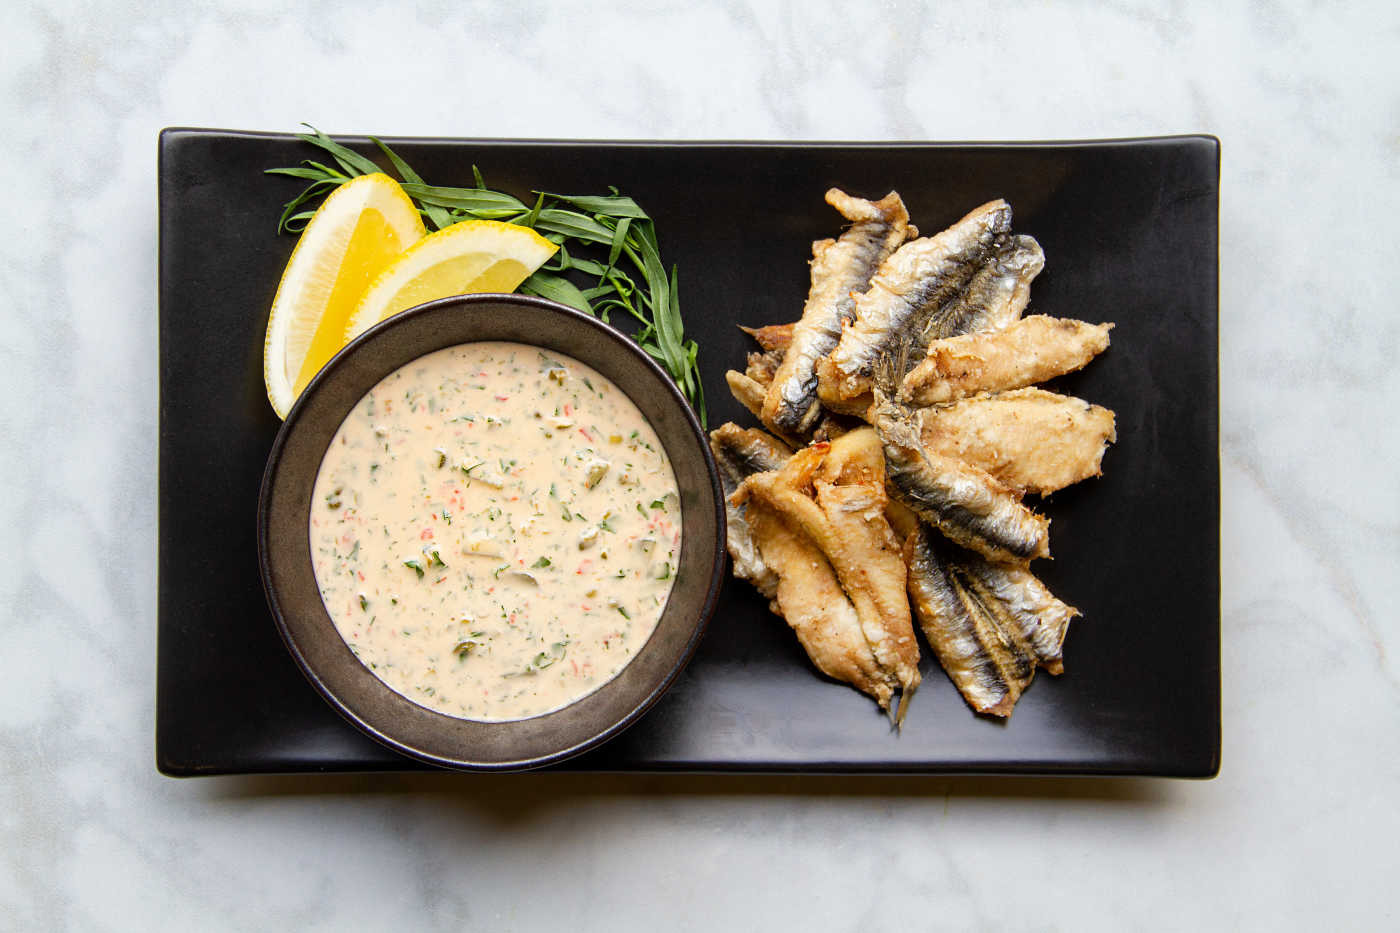 CURED & FRIED ANCHOVY FILLETS WITH SPICY REMOULADE SAUCE